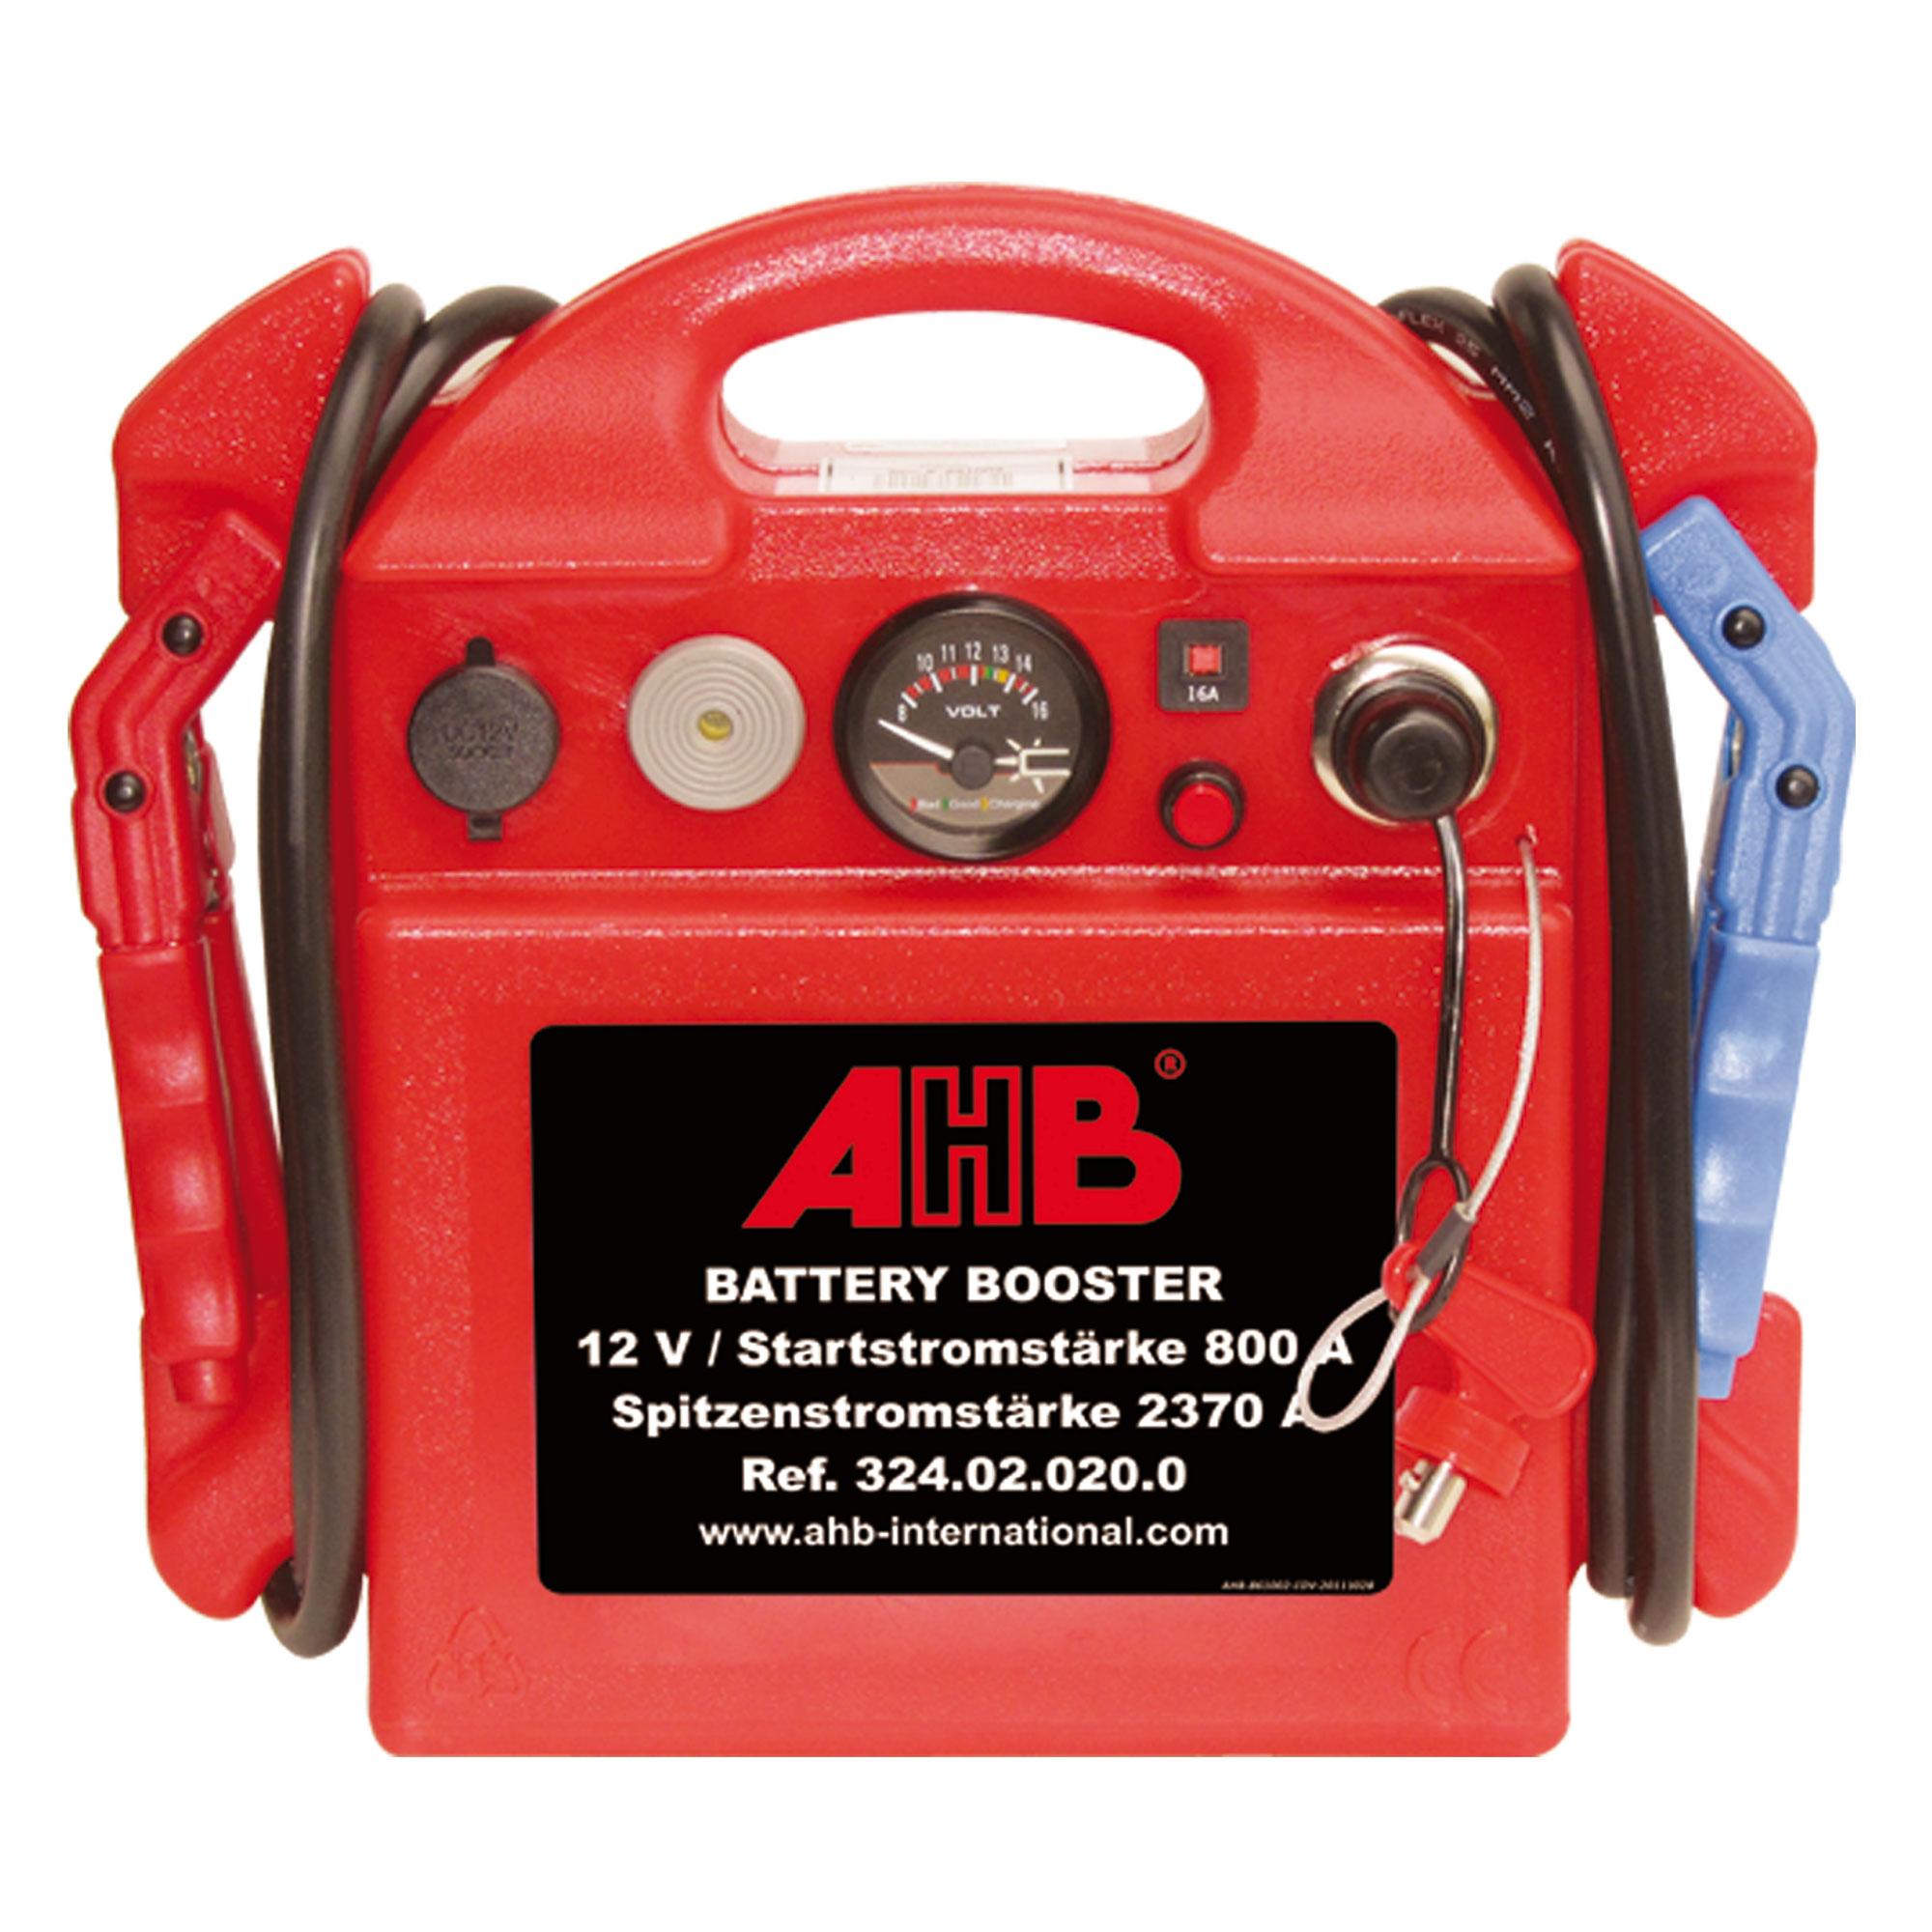 https://www.ahb-shop.com/out/pictures/master/product/1/324020200_Battery-Booster.jpg